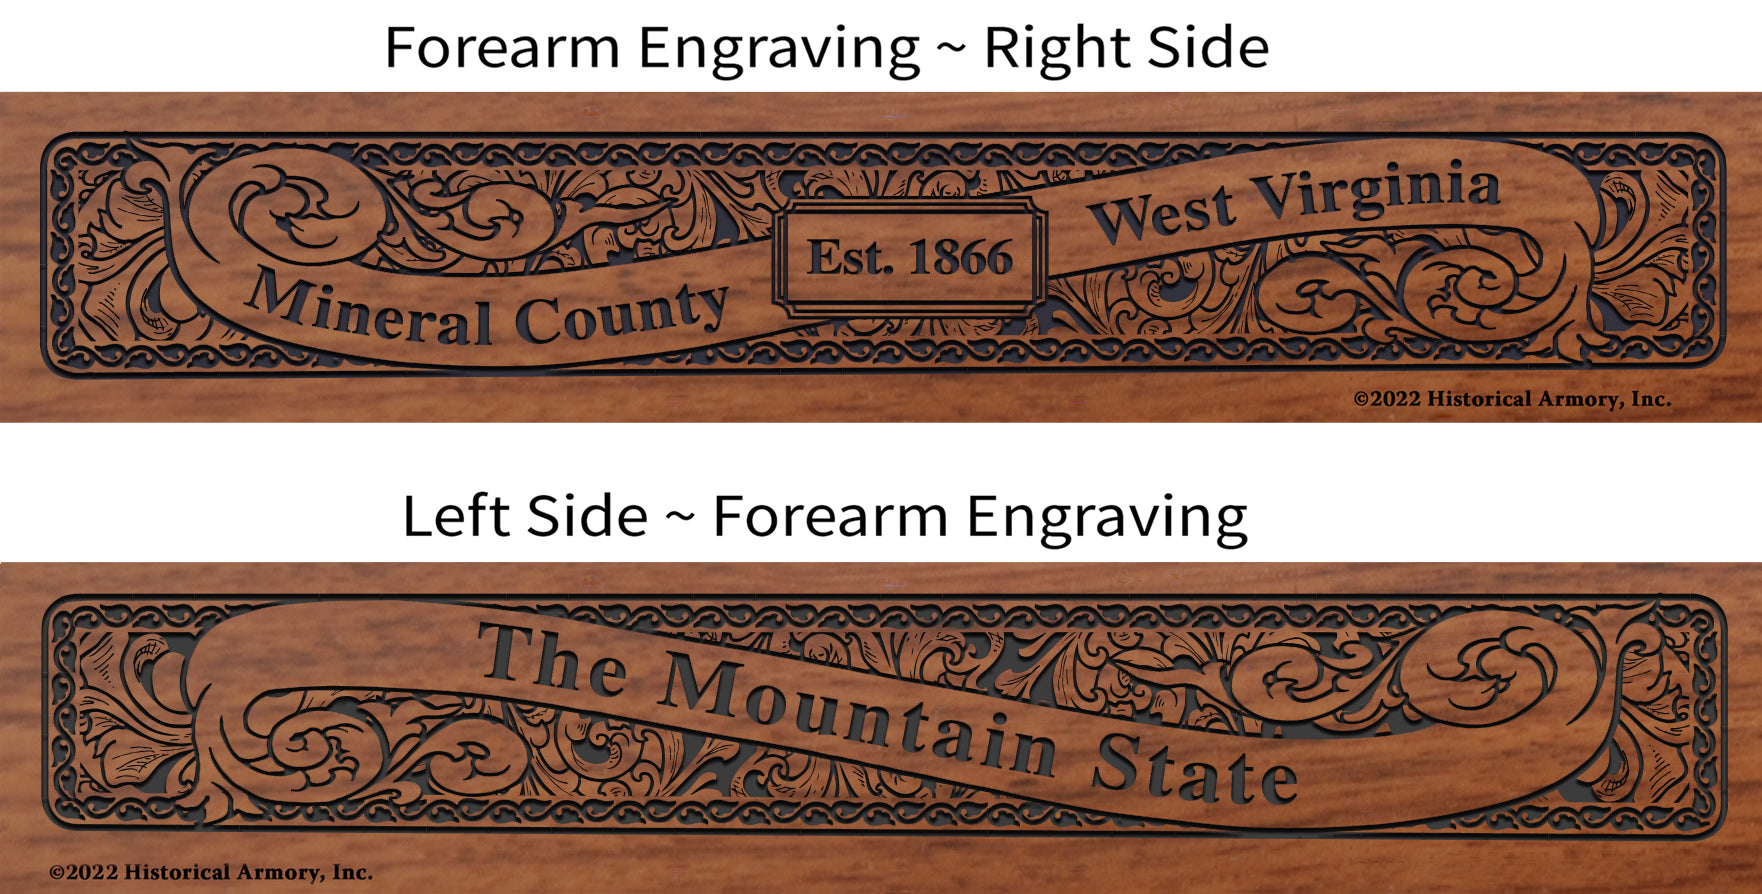 Mineral County West Virginia Engraved Rifle Forearm